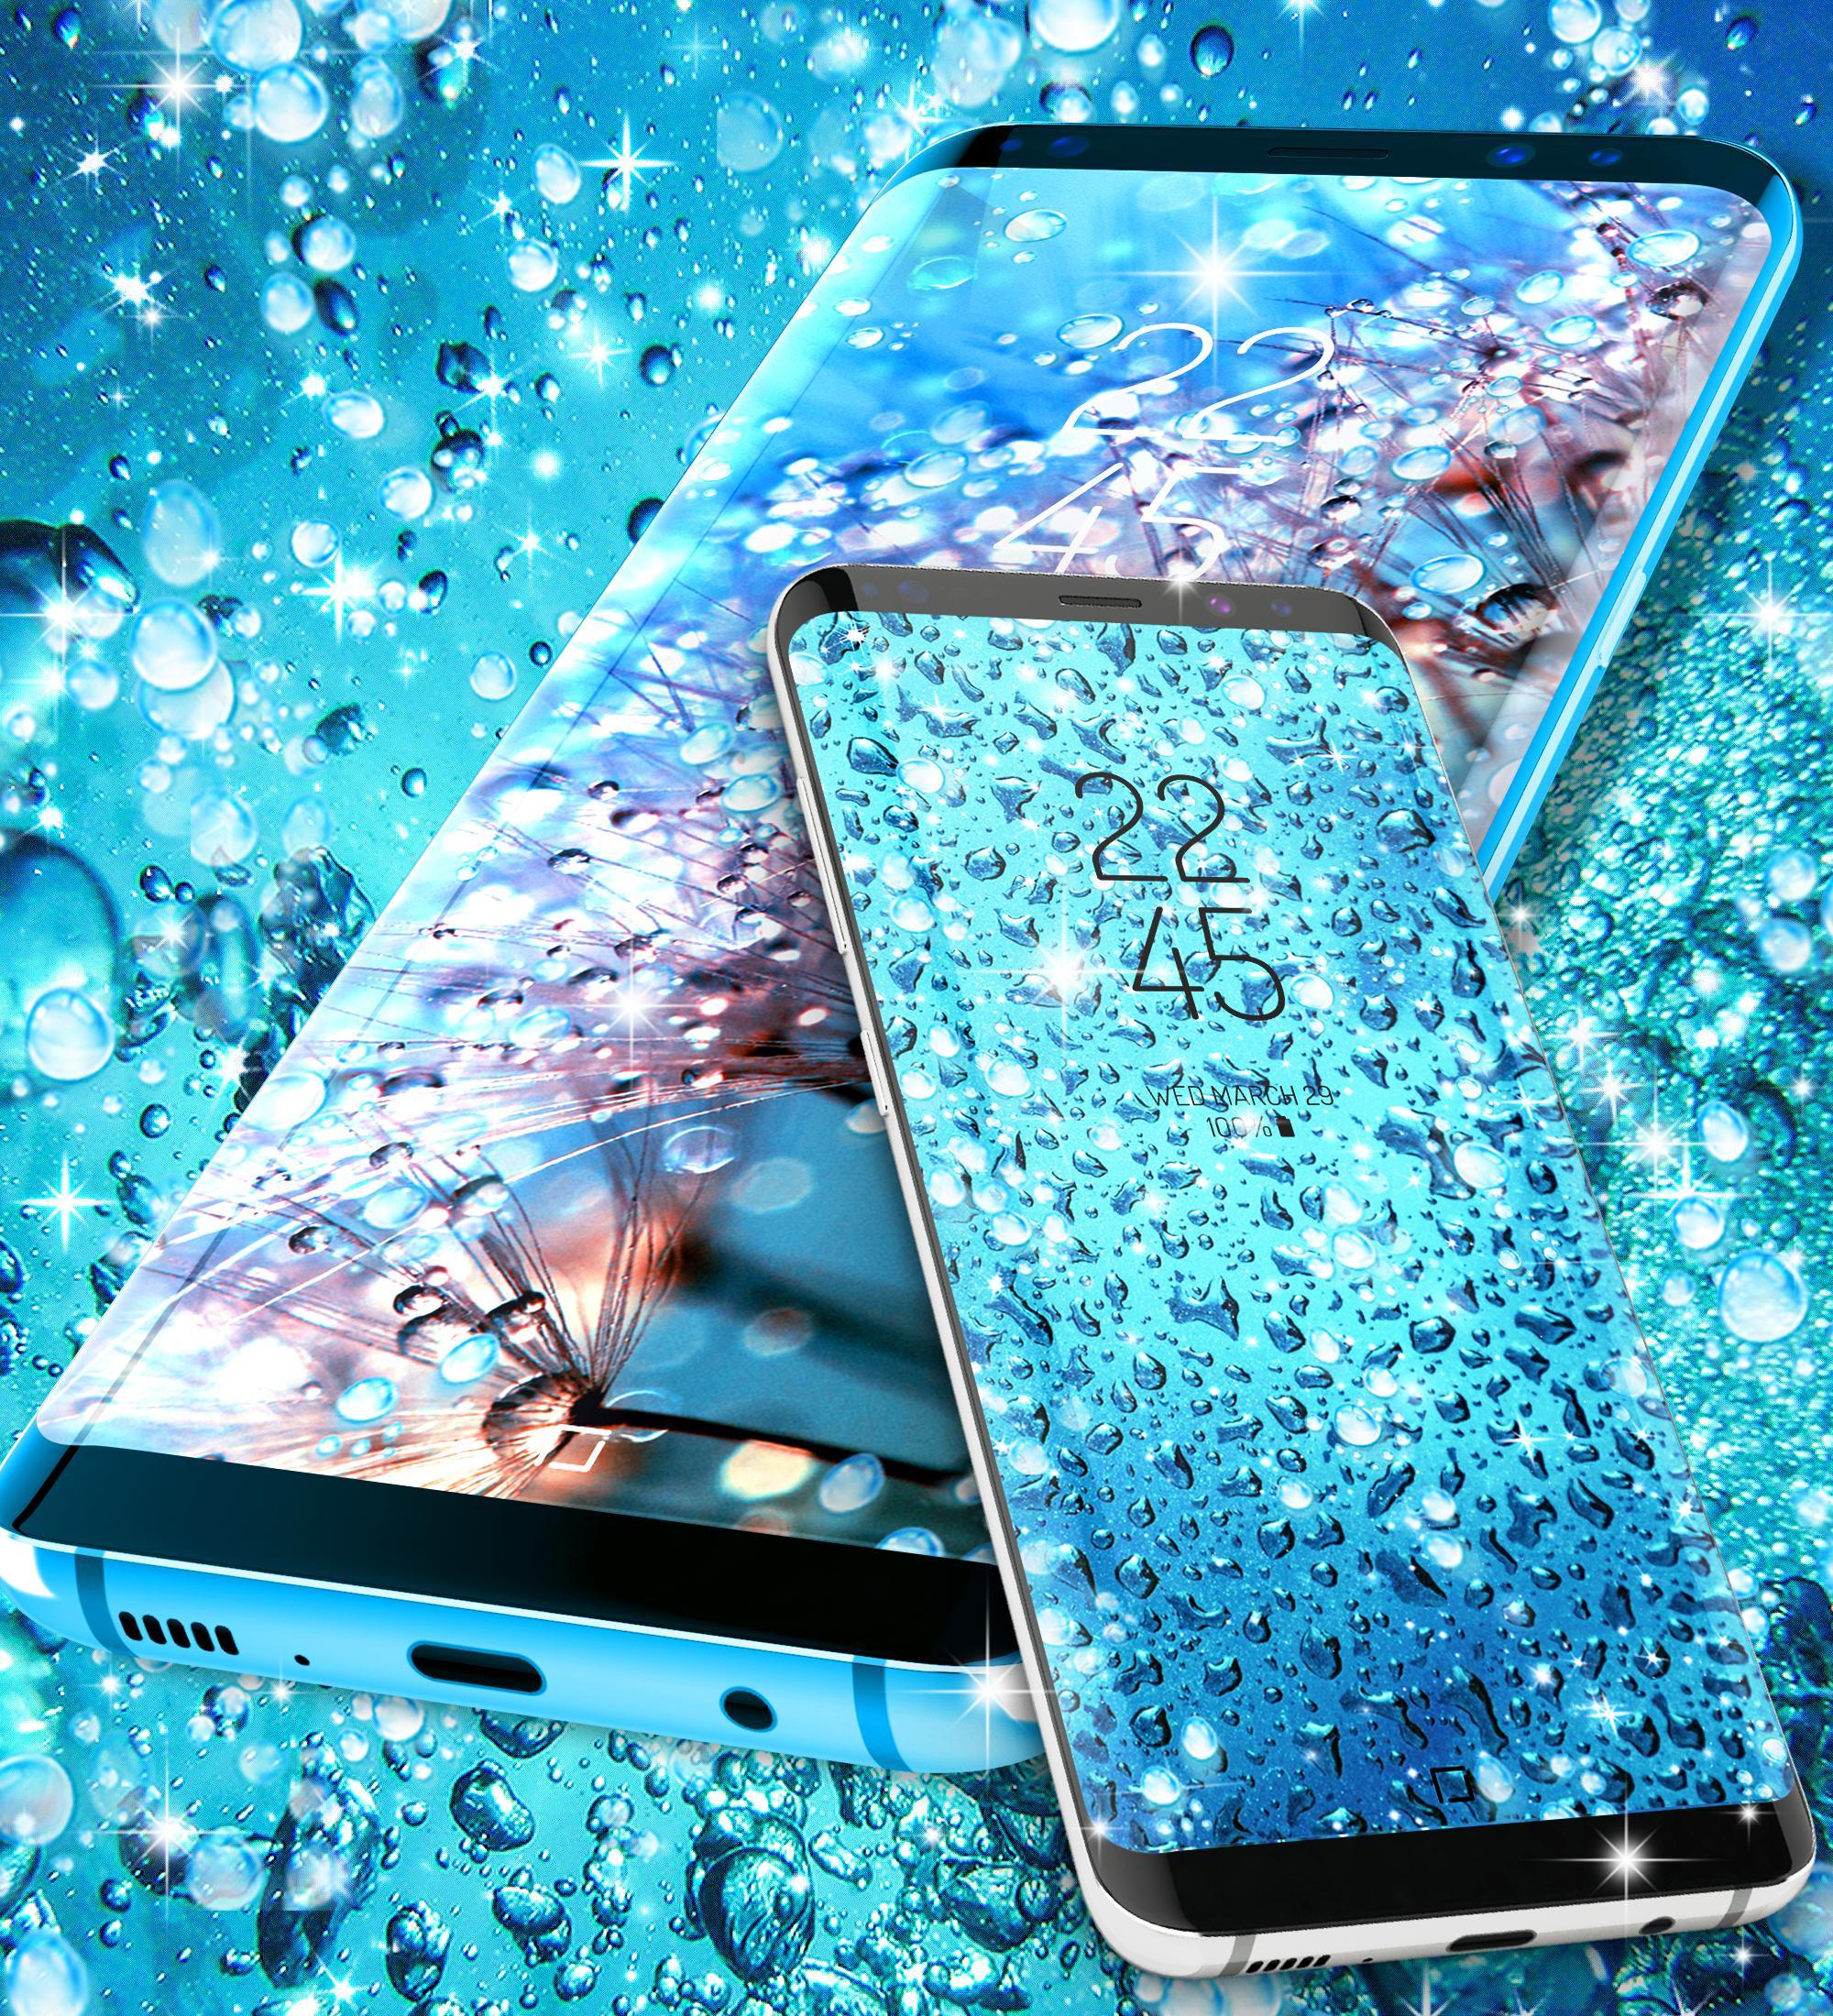  Water  drops  live wallpaper  for Android  APK Download